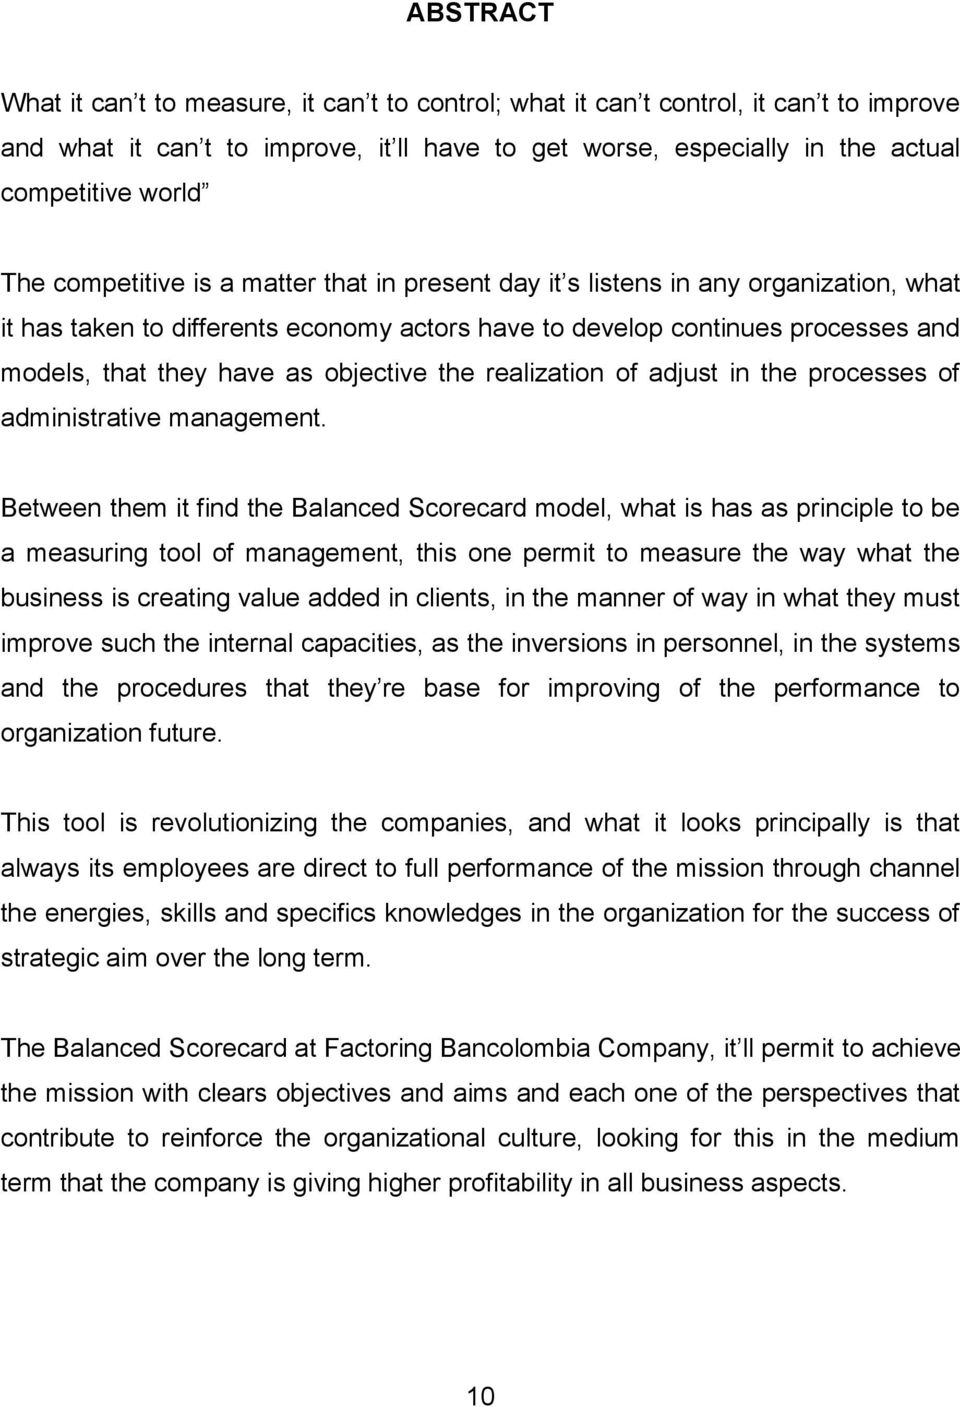 objective the realization of adjust in the processes of administrative management.